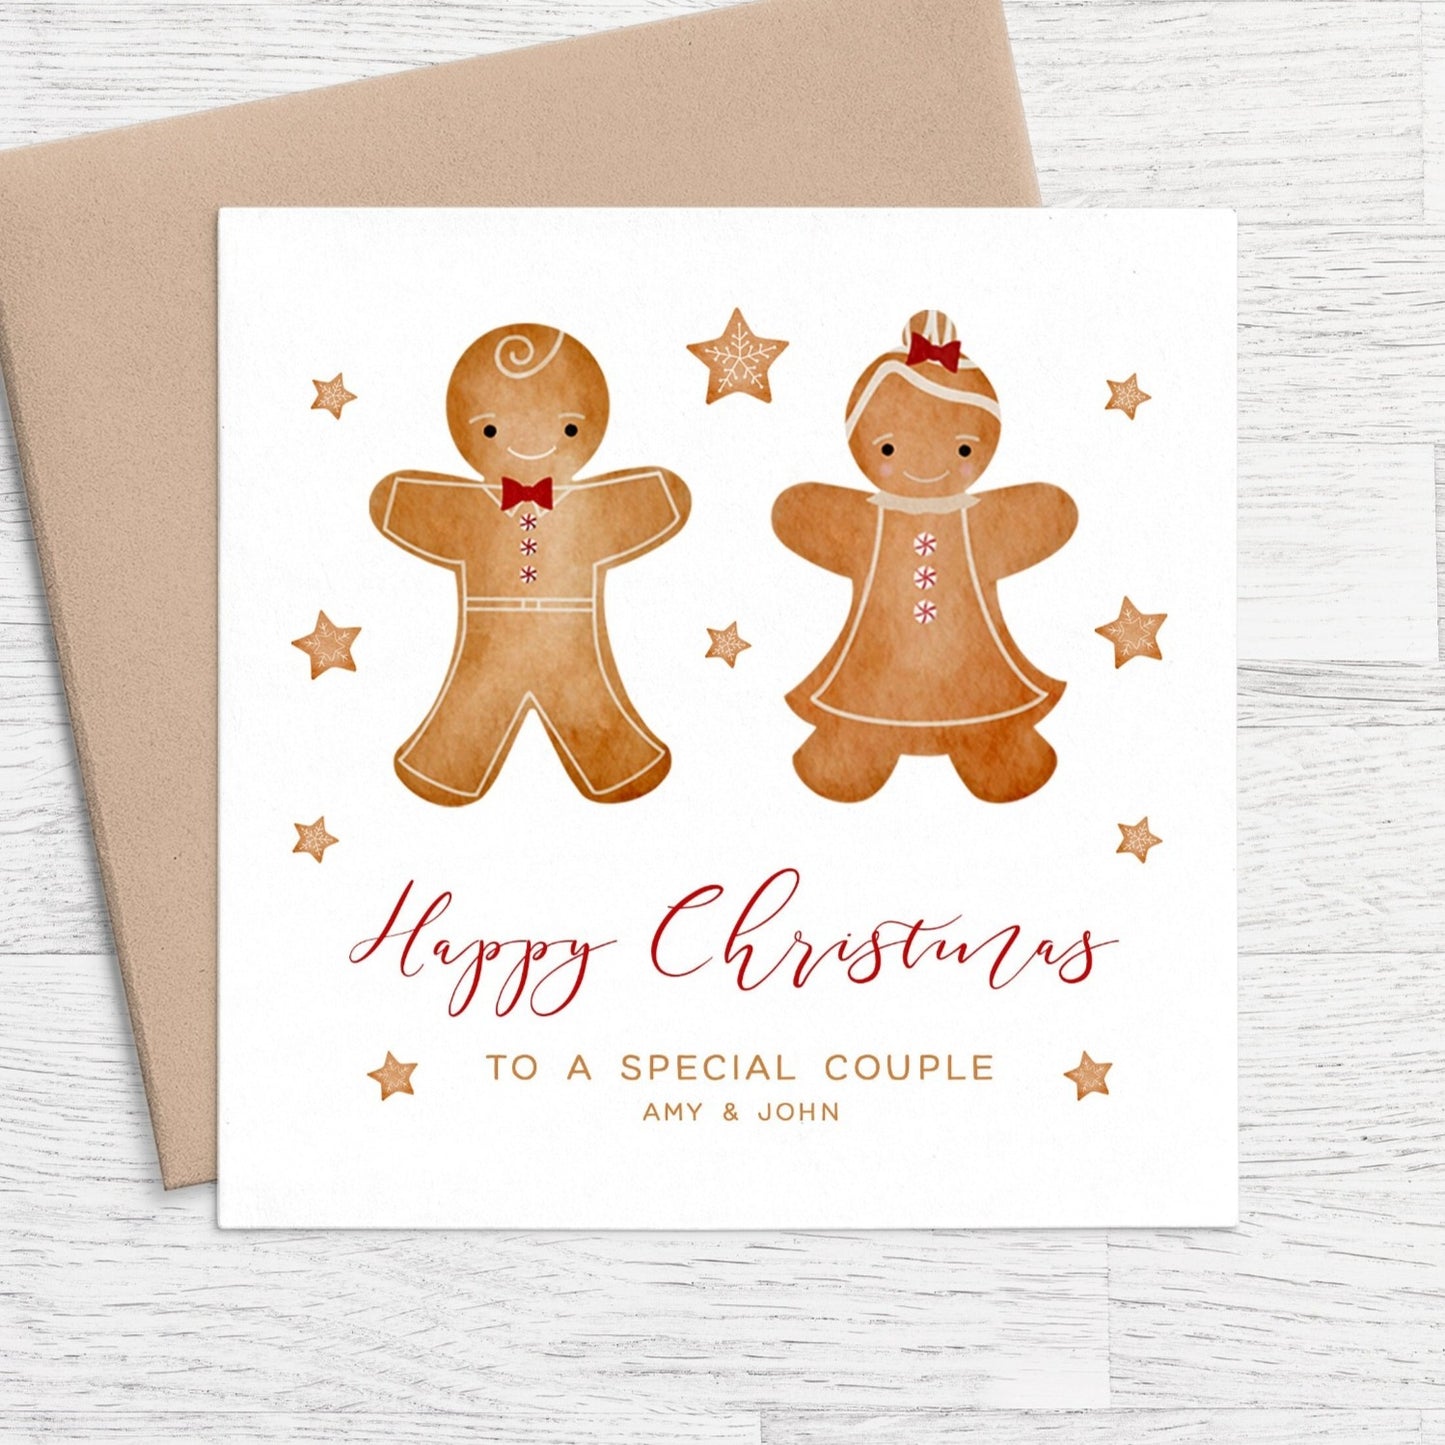 gingerbread happy christmas special couple card personalised kraft brown envelope matte white cardstock